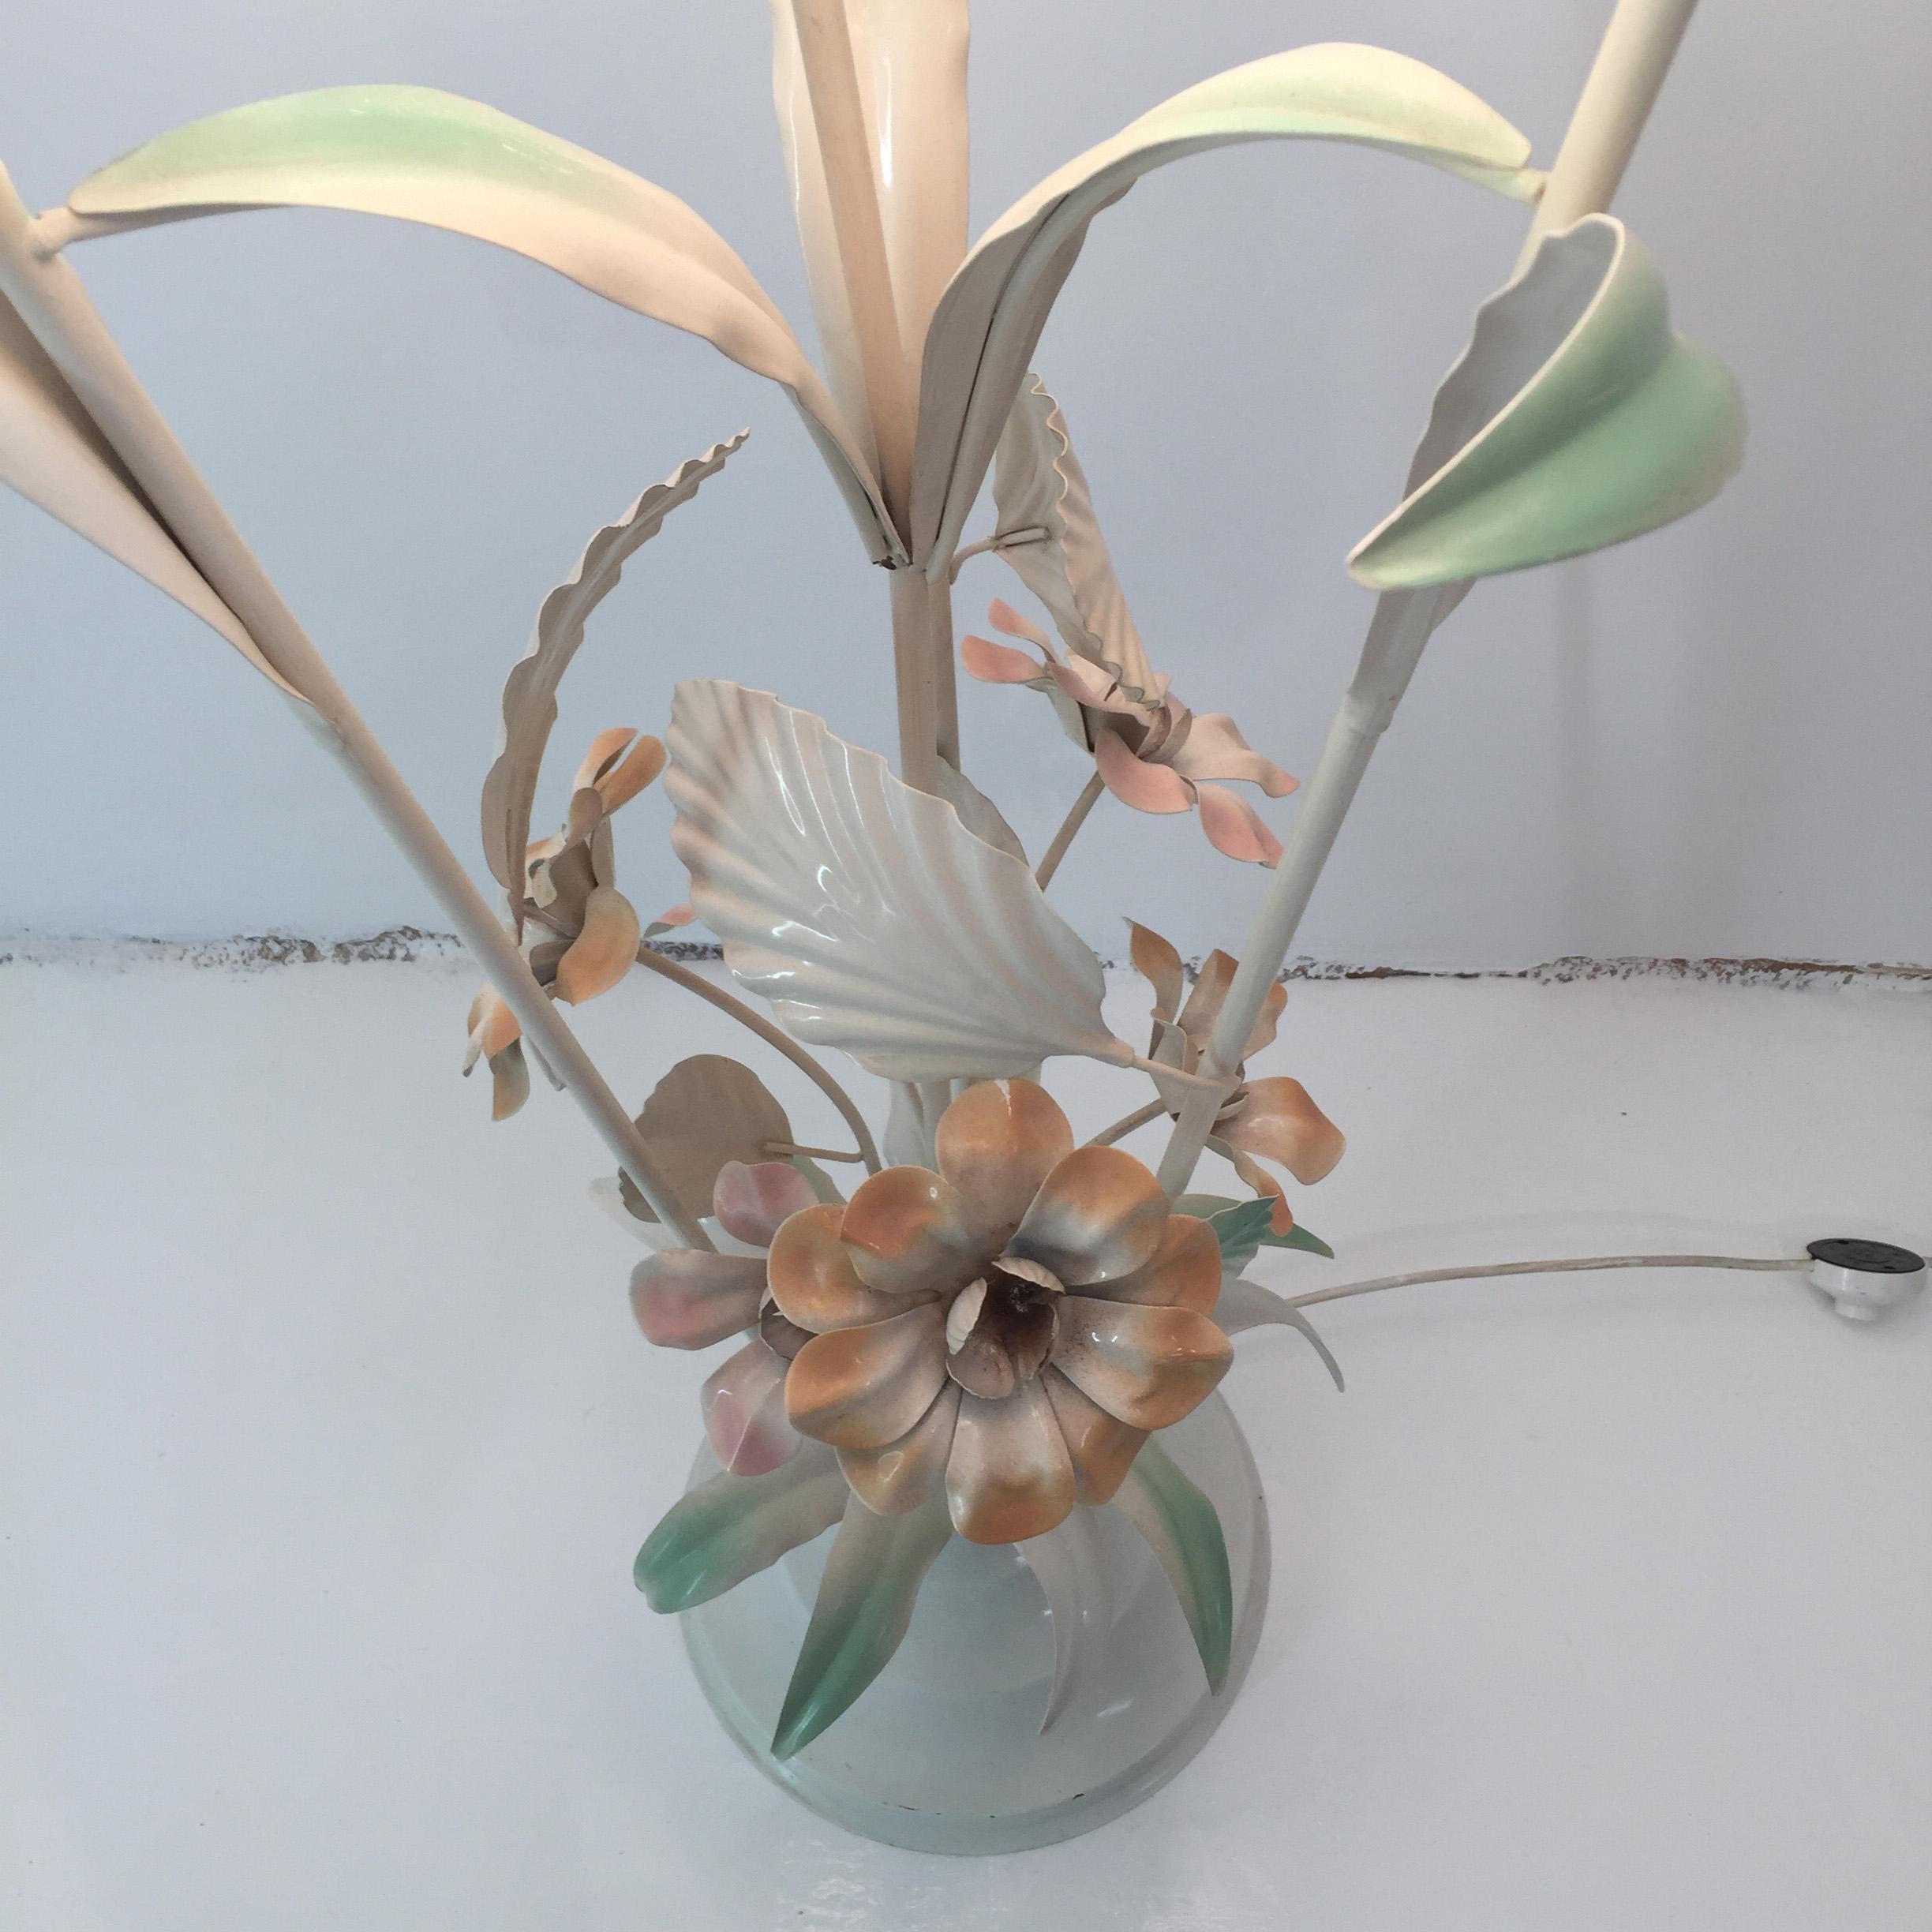 Vintage Toleware Four Globe Flower Floor Lamp Retro Midcentury Boho In Good Condition For Sale In London, GB